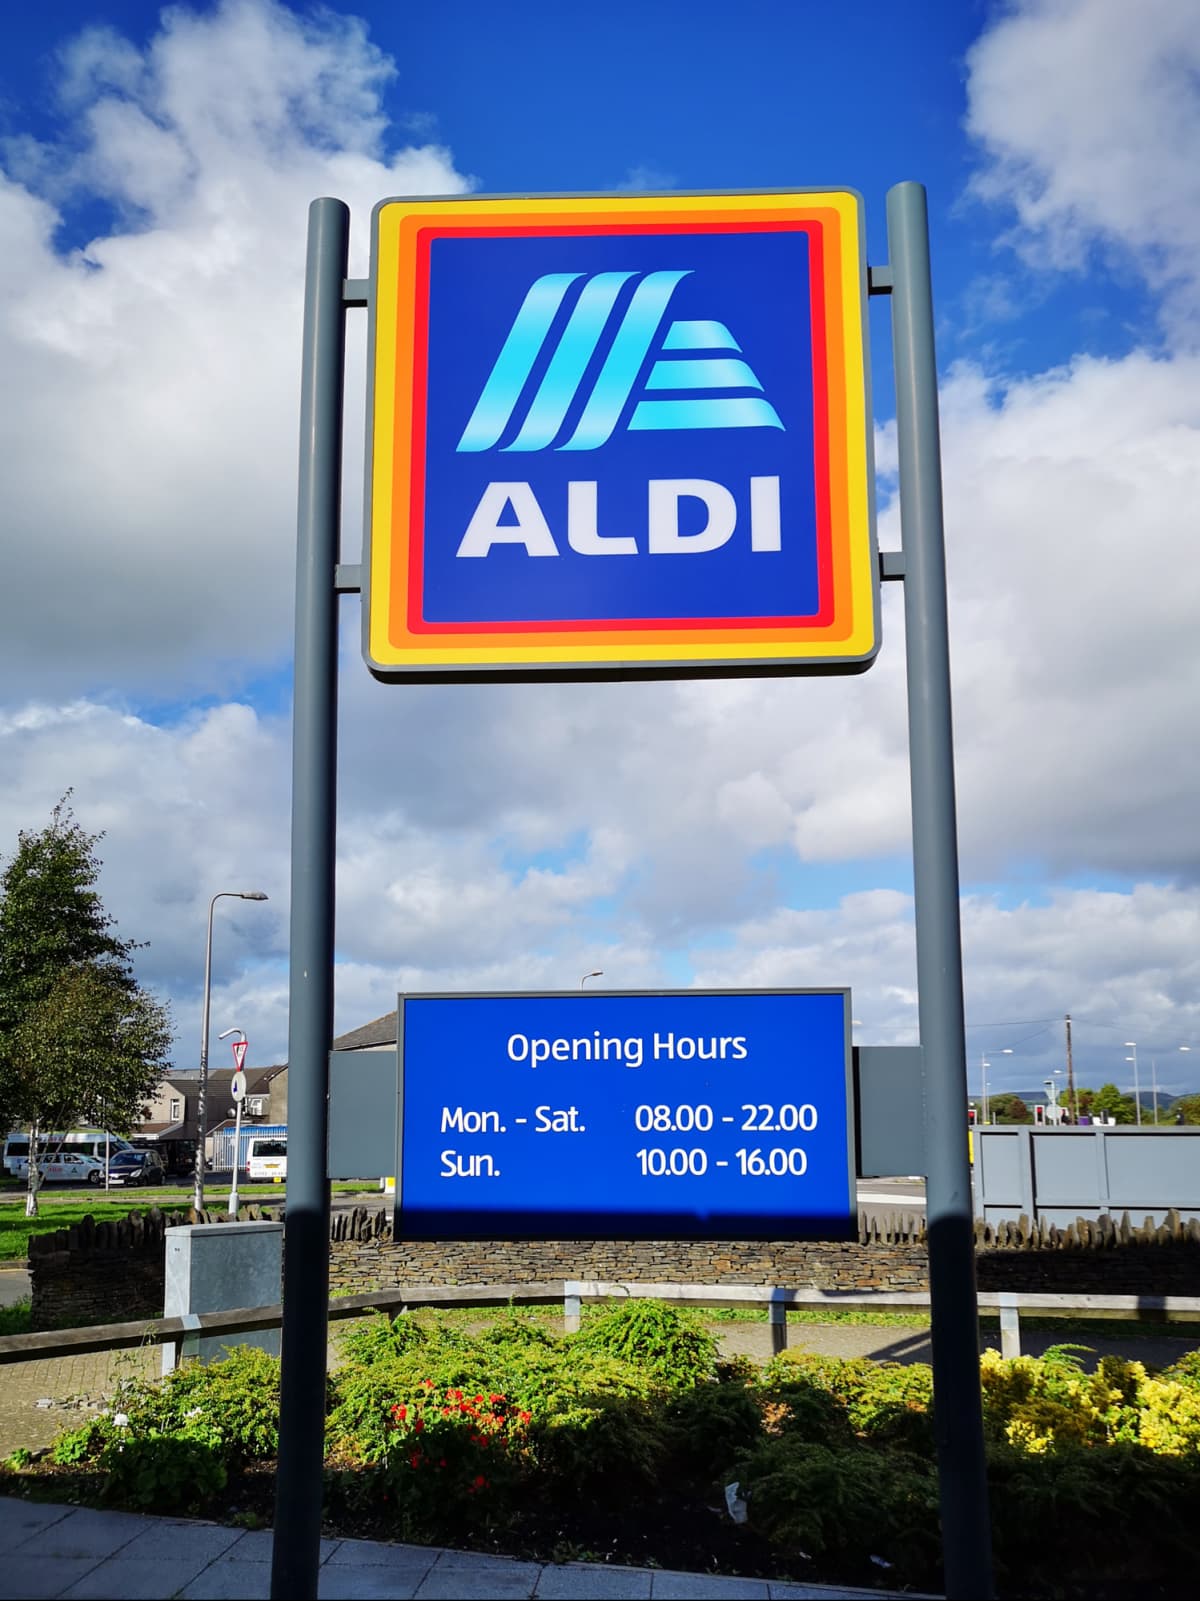 Swansea, UK: September 21, 2018: Commercial sign of ALDI Store against a blue sky. ALDI is the common brand of two German discount supermarket chains with over 10,000 stores in 20 countries, and an estimated combined turnover of more than €50 billion.